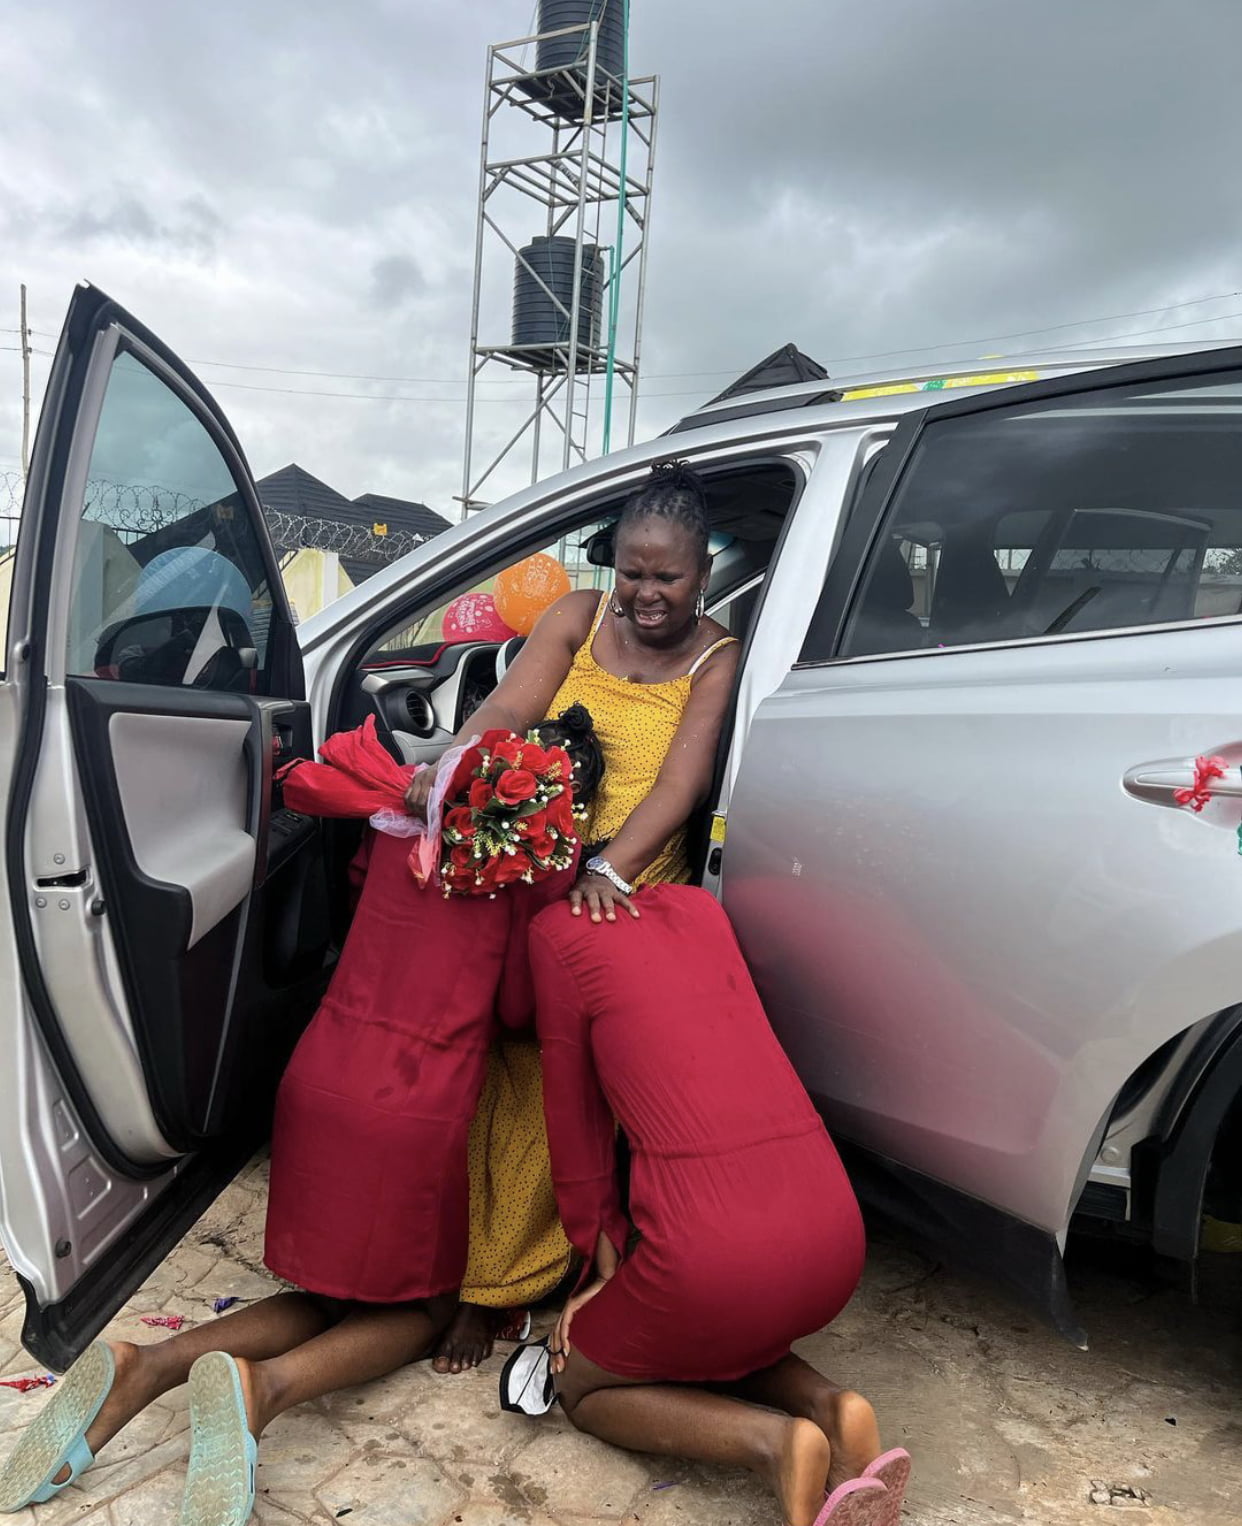 Skit Makers Twinz Love Surprise mom with new car [video]